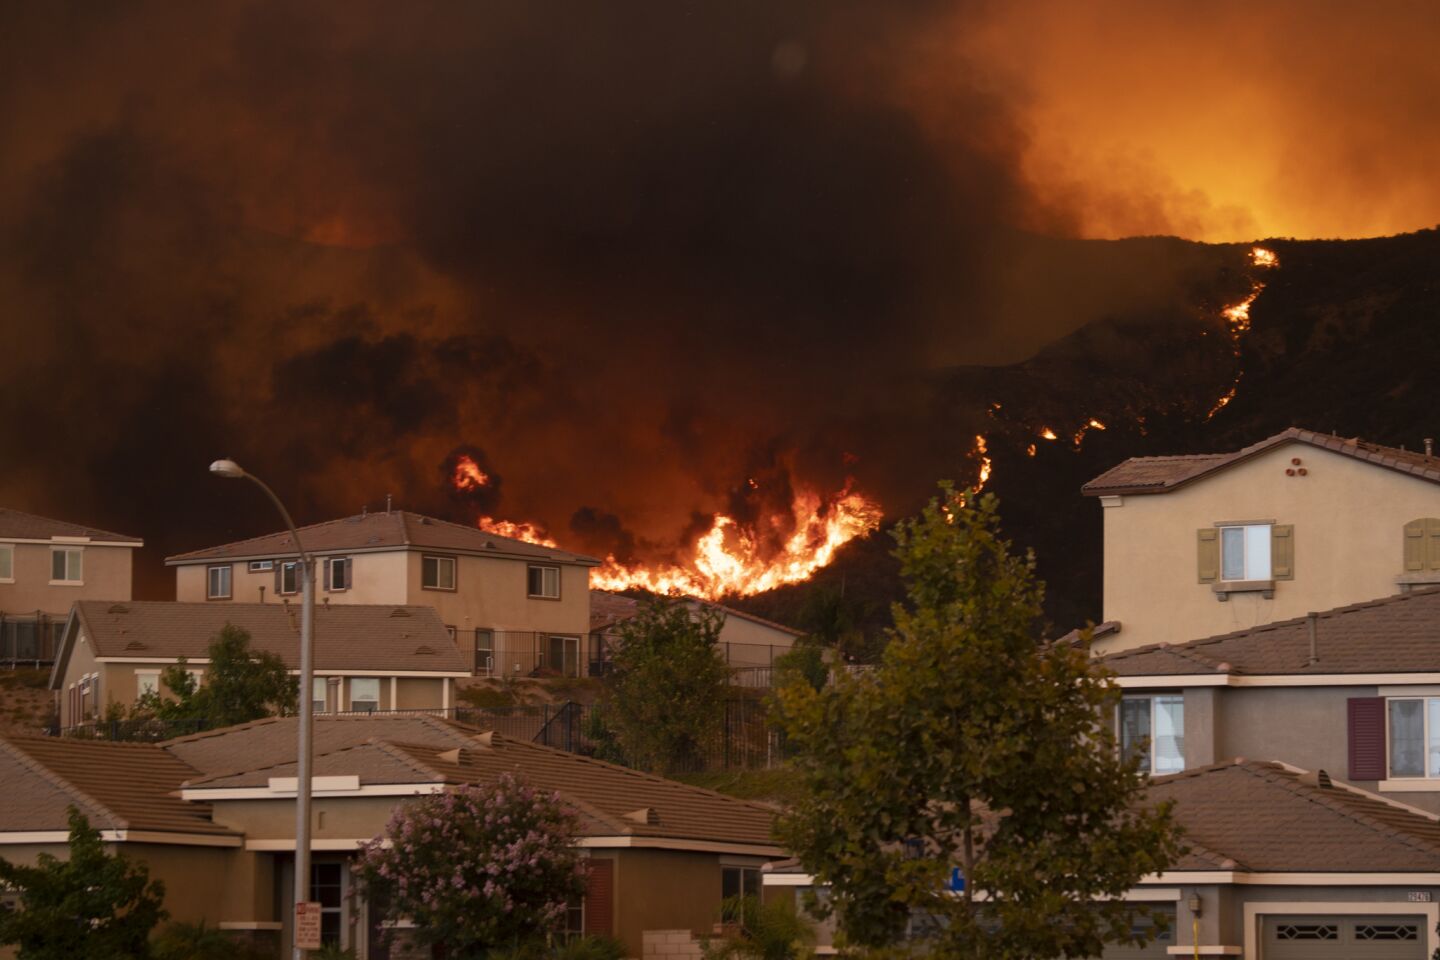 The Holy fire on Wednesday approaches Lake Elsinore's McVicker Canyon neighborhood, which is under mandatory evacuation orders.